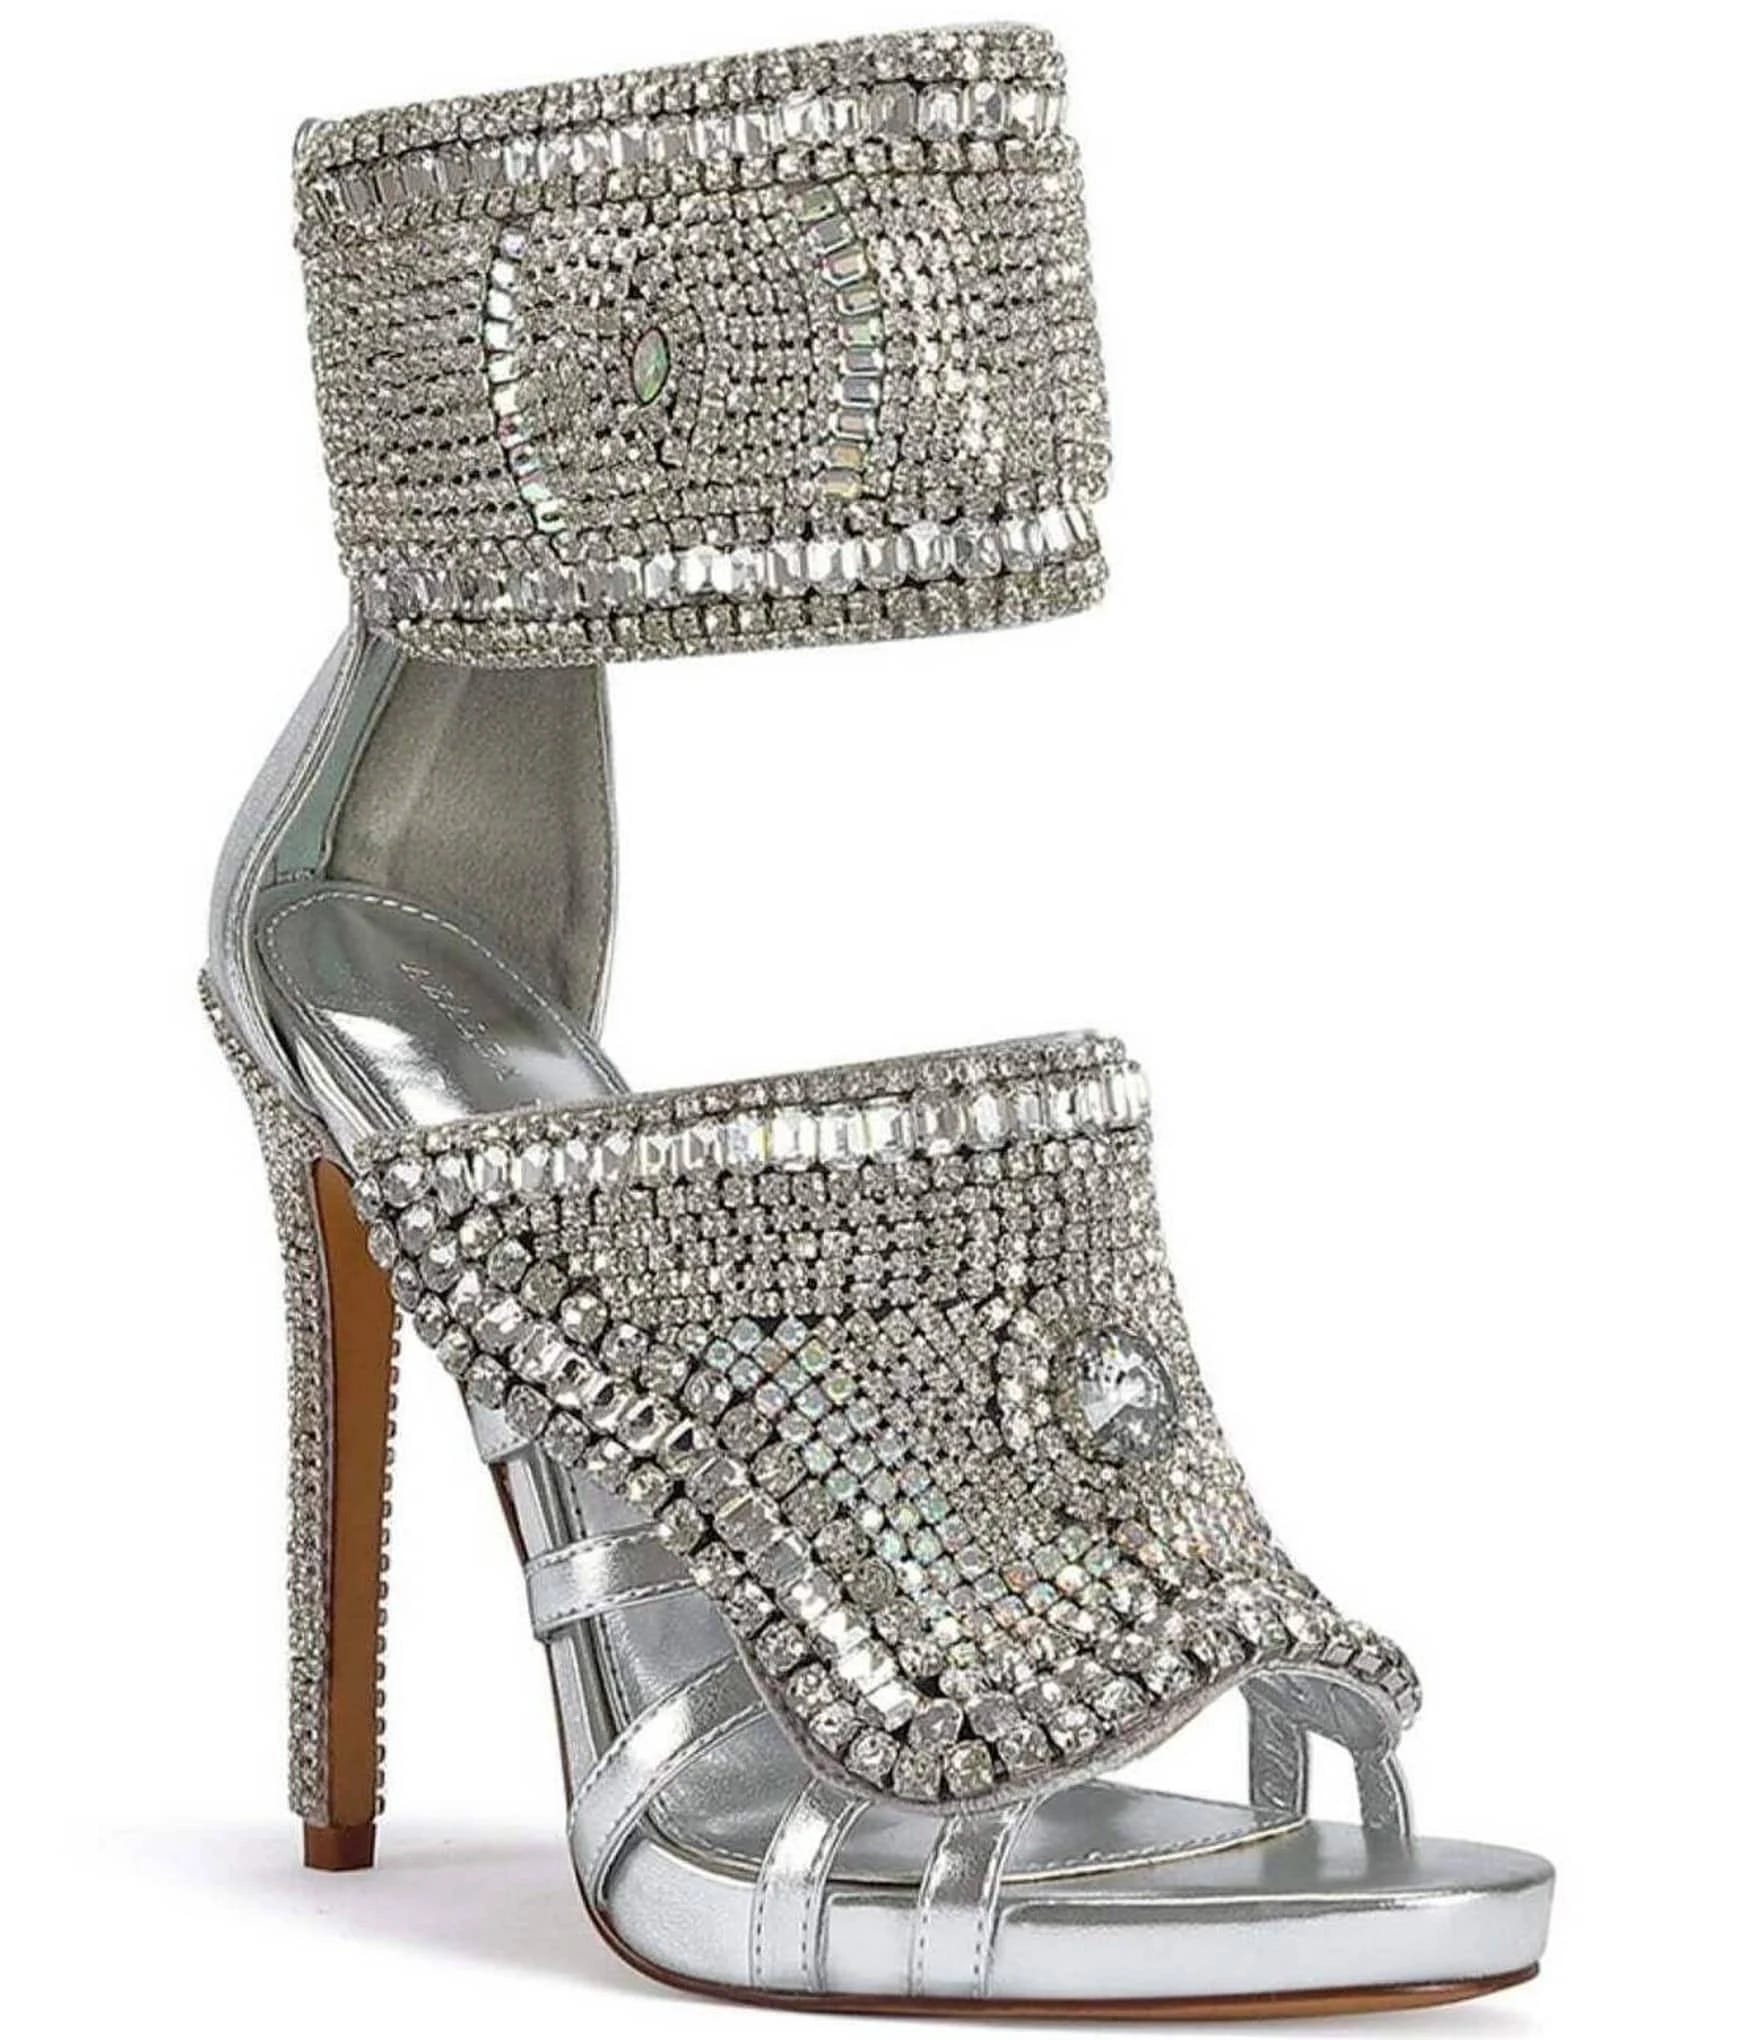 Grizzled Rhinestone Ankle Cuff Dress Sandals for Evening | Image